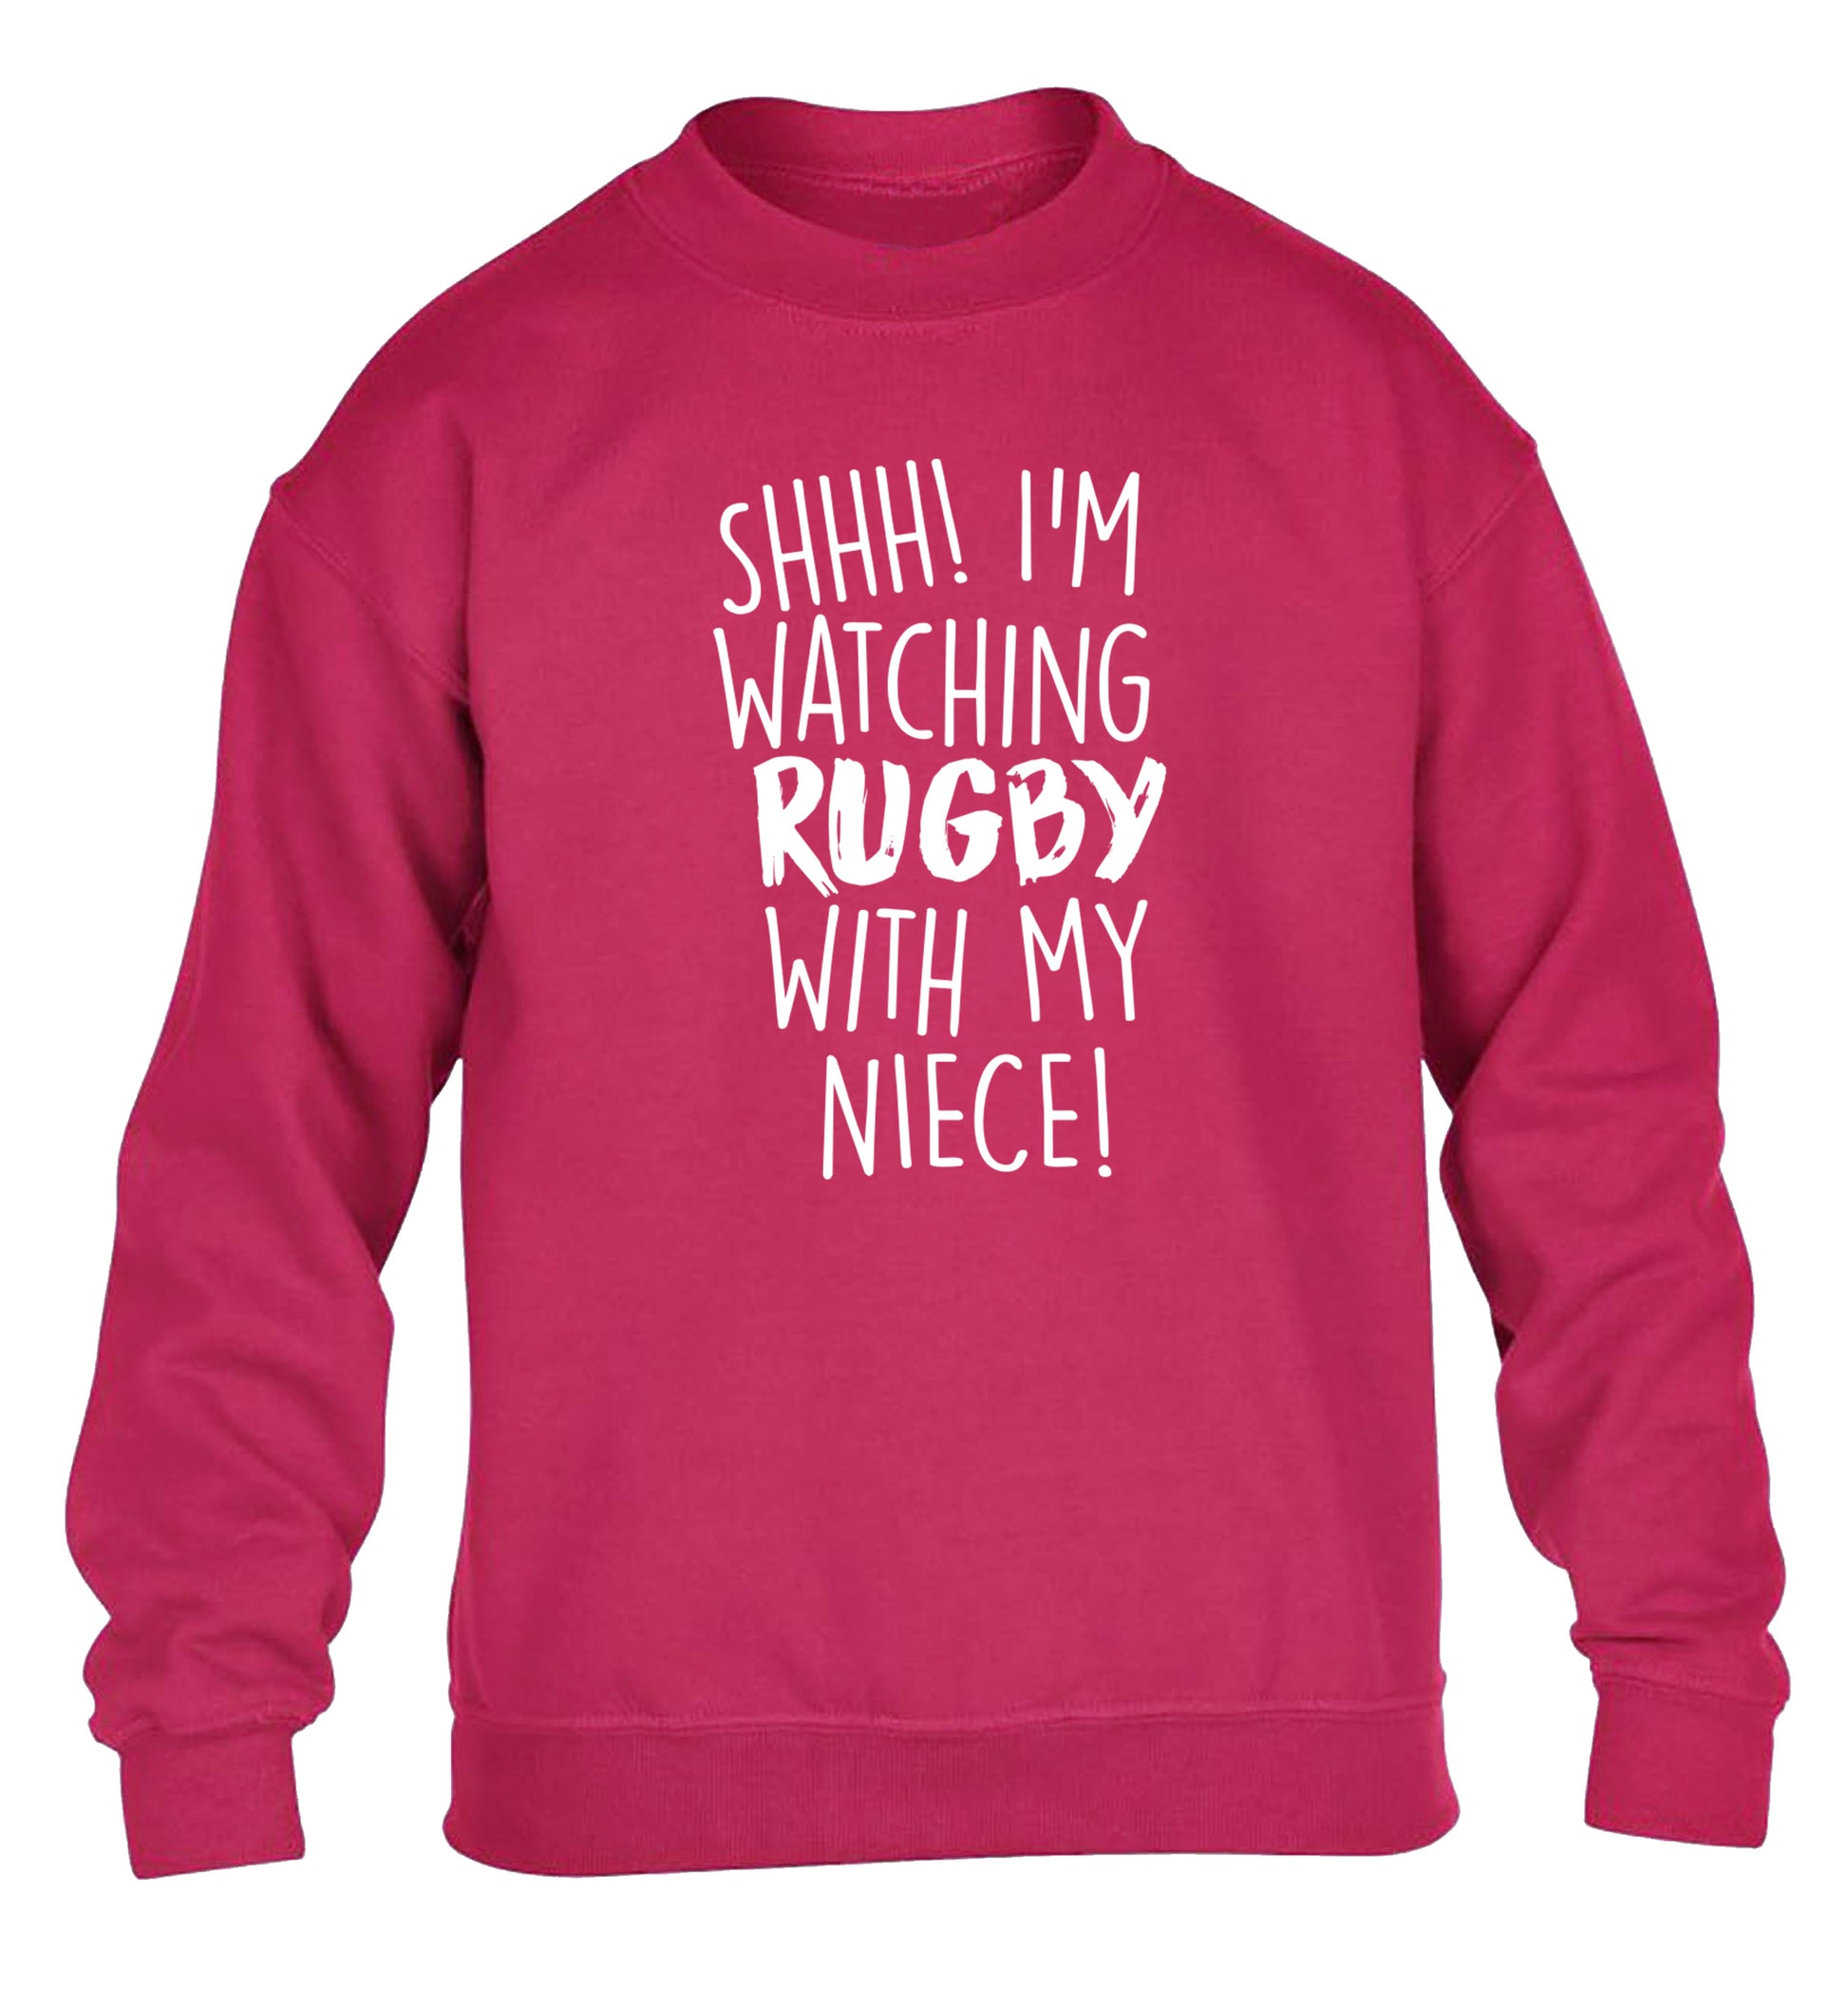 Shh.. I'm watching rugby with my niece children's pink sweater 12-13 Years